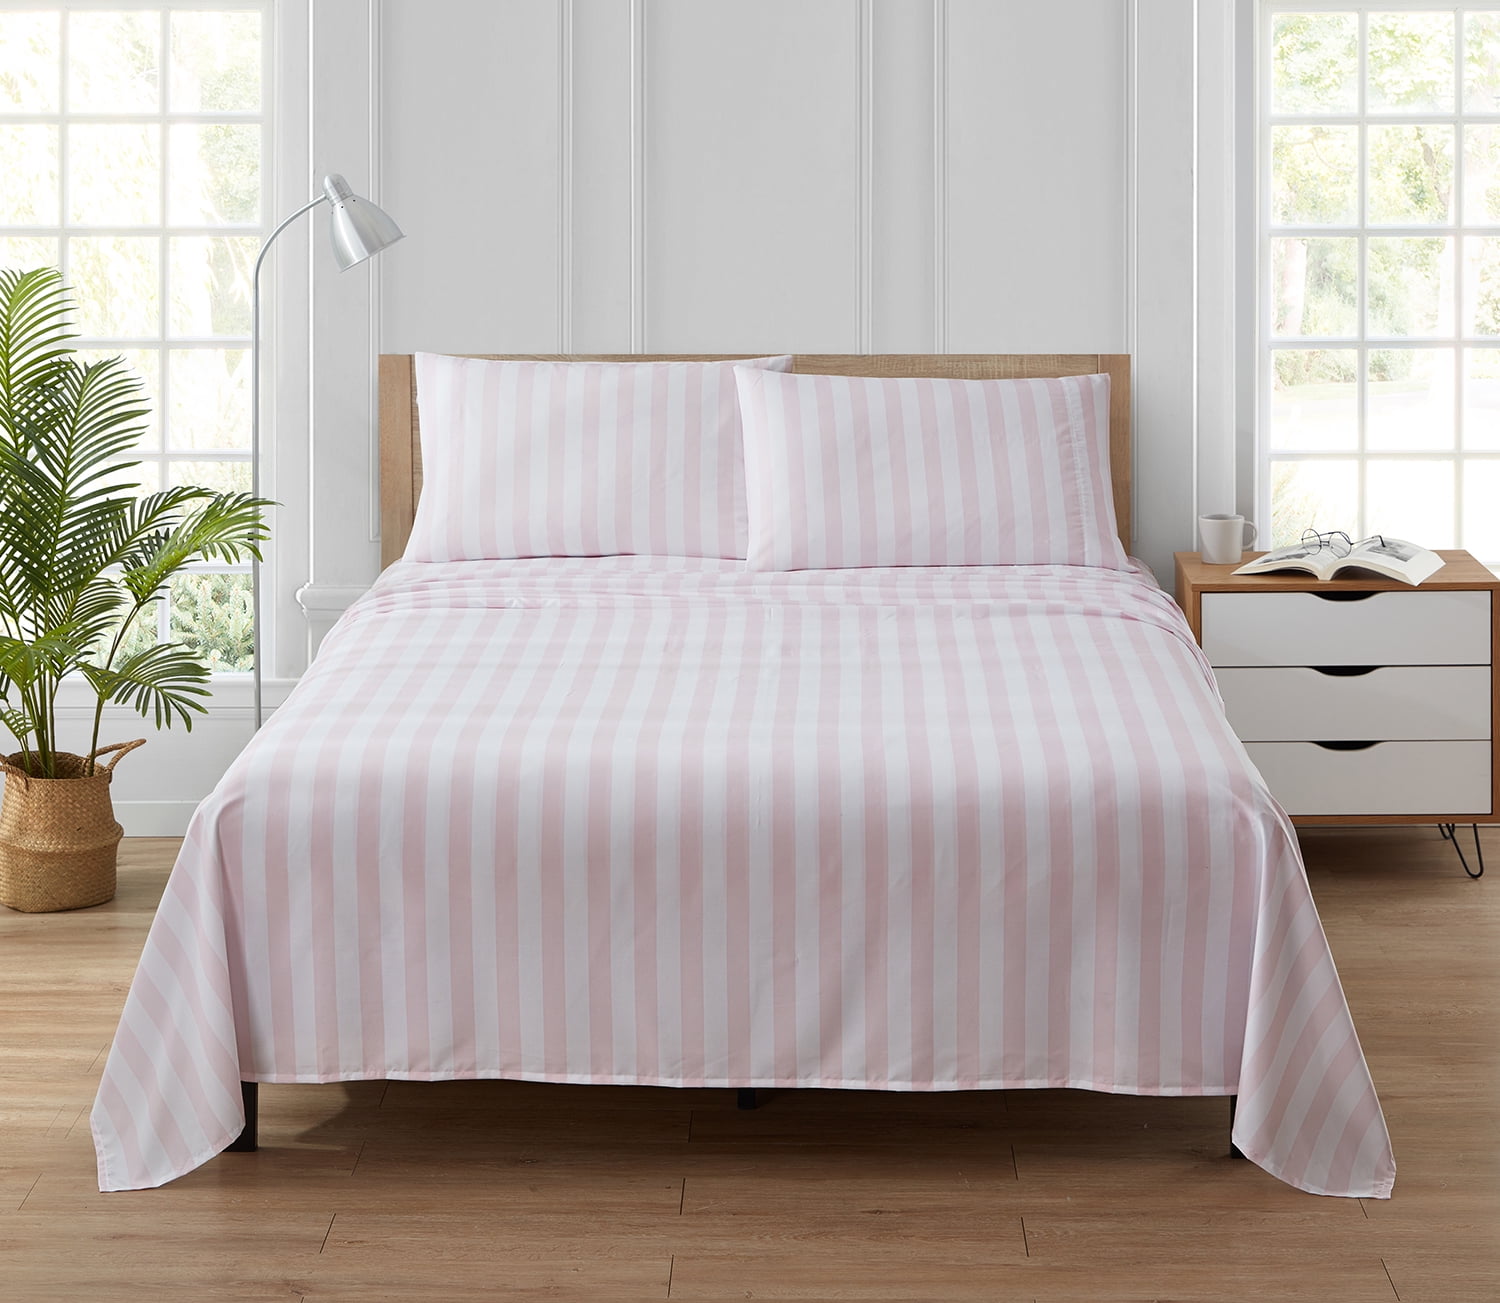 Super King Size VICEROY BEDDING 15 Extra Deep 100% Cotton Super Soft Thermal Flannelette Fitted Bed Sheet by Viceroybedding Pink